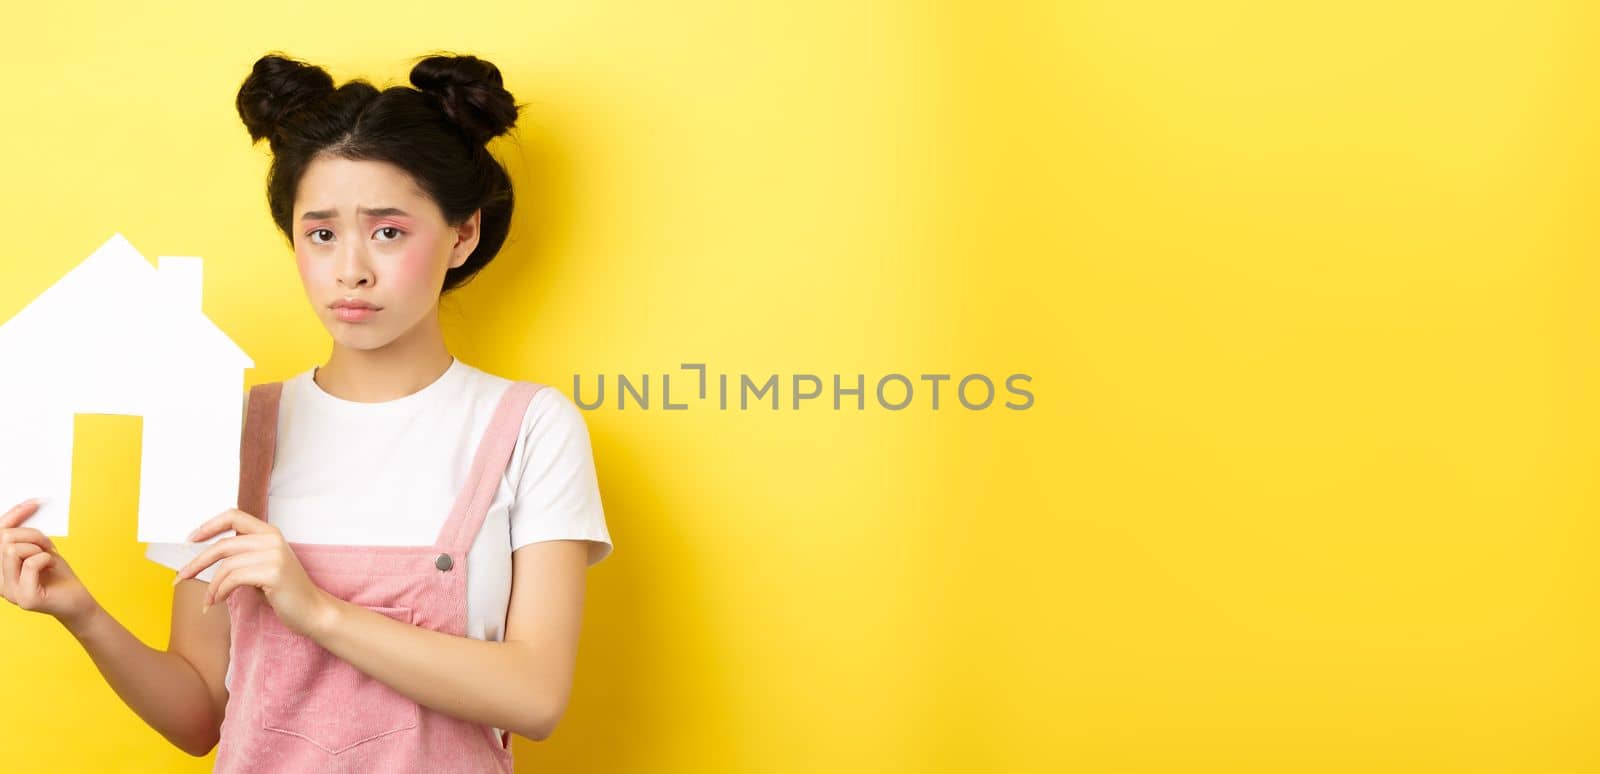 Real estate and family concept. Sad cute asian girl with bright makeup, frowning and feel upset, showing paper house cutout, standing on yellow background.